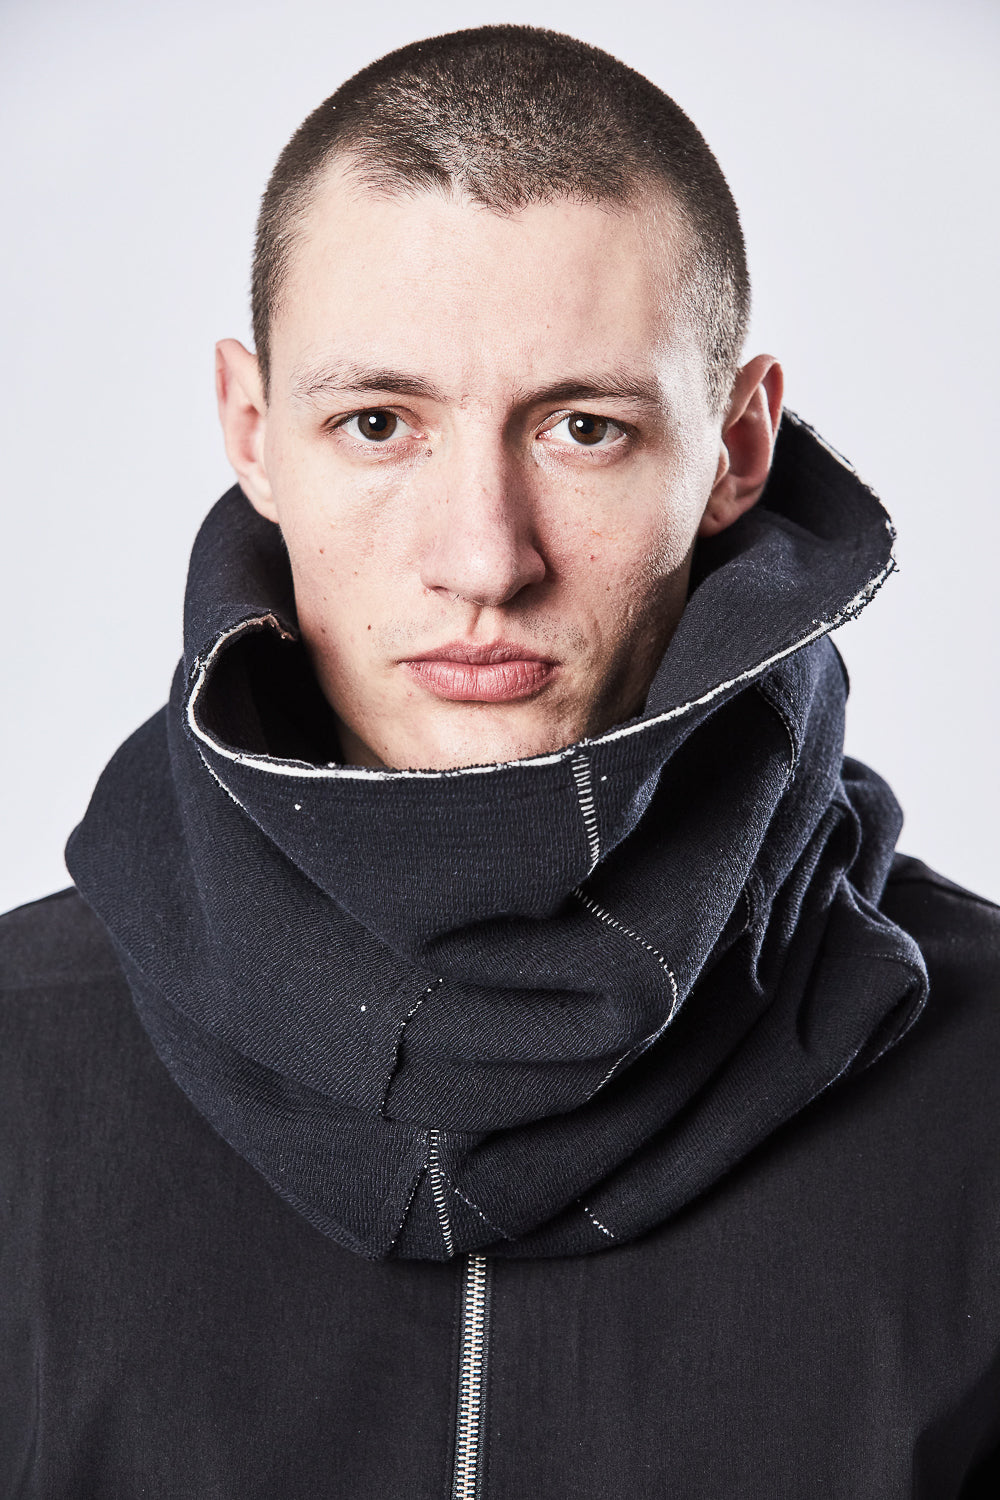 Buy the Thom Krom Scarf 48 in Black at Intro. Spend £50 for free UK delivery. Official stockists. We ship worldwide.